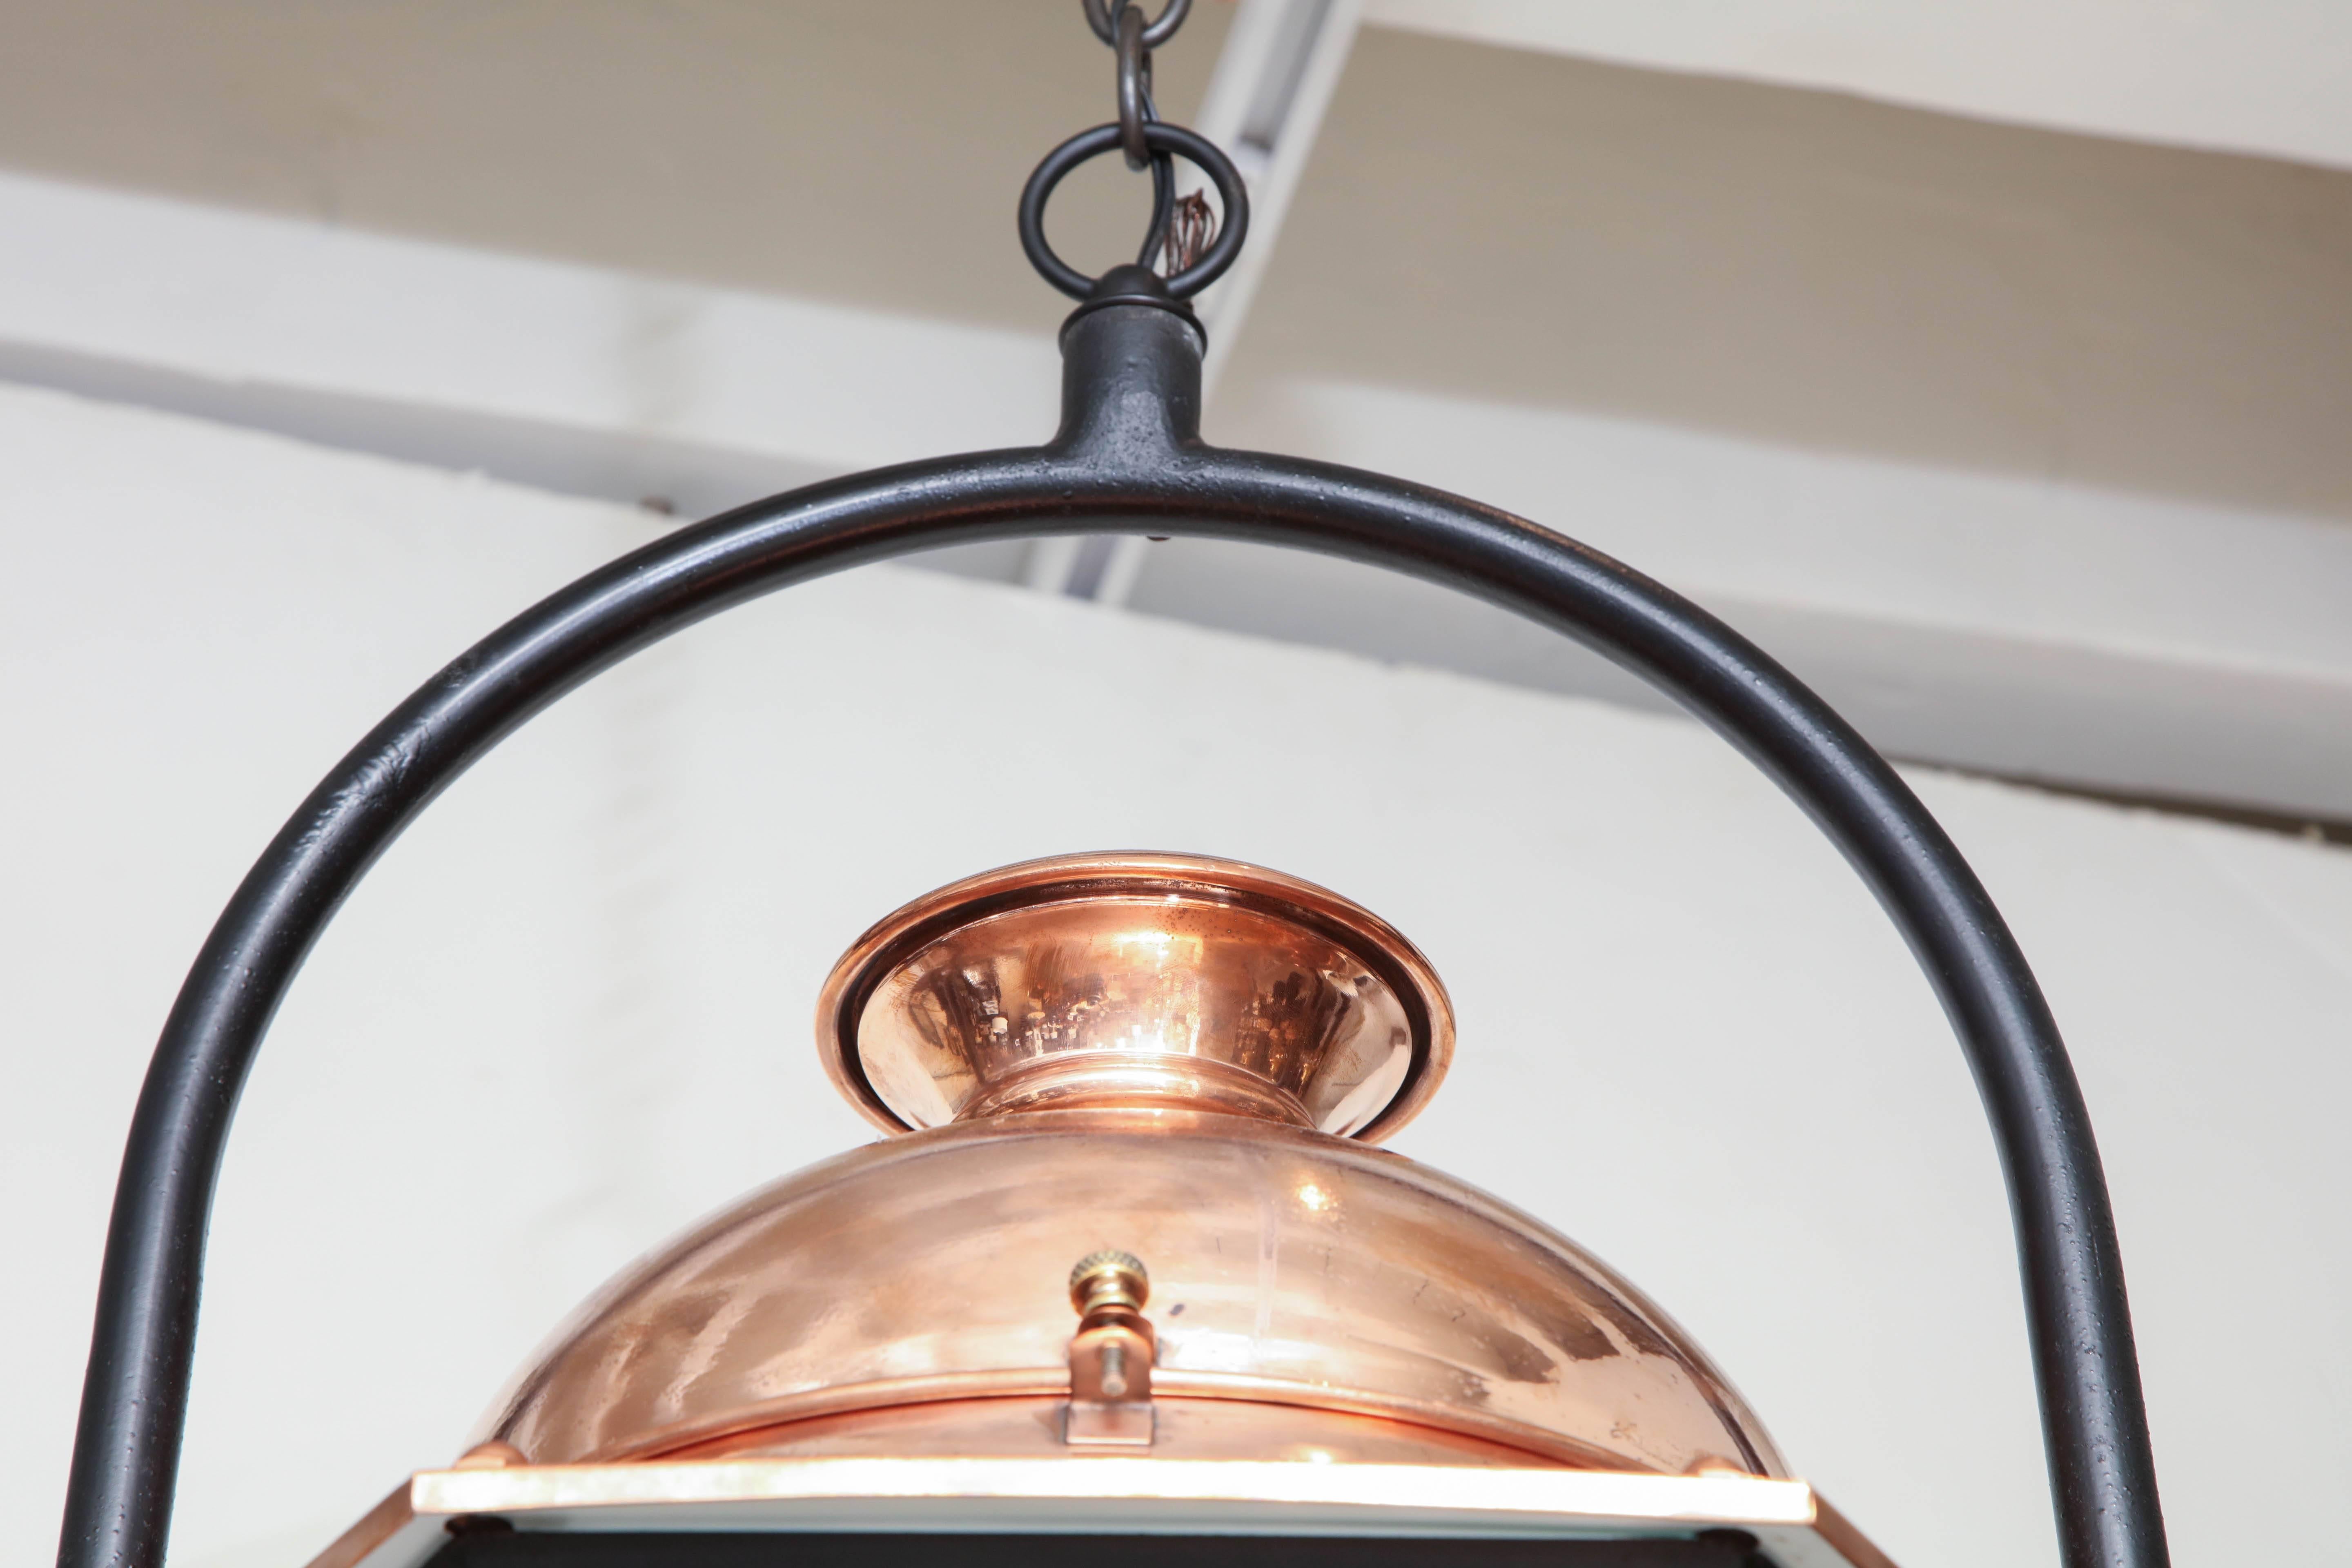 20th Century Copper and Glass Lantern/Pendant with Iron Ring Hanger, circa 1900 In Excellent Condition For Sale In New York, NY